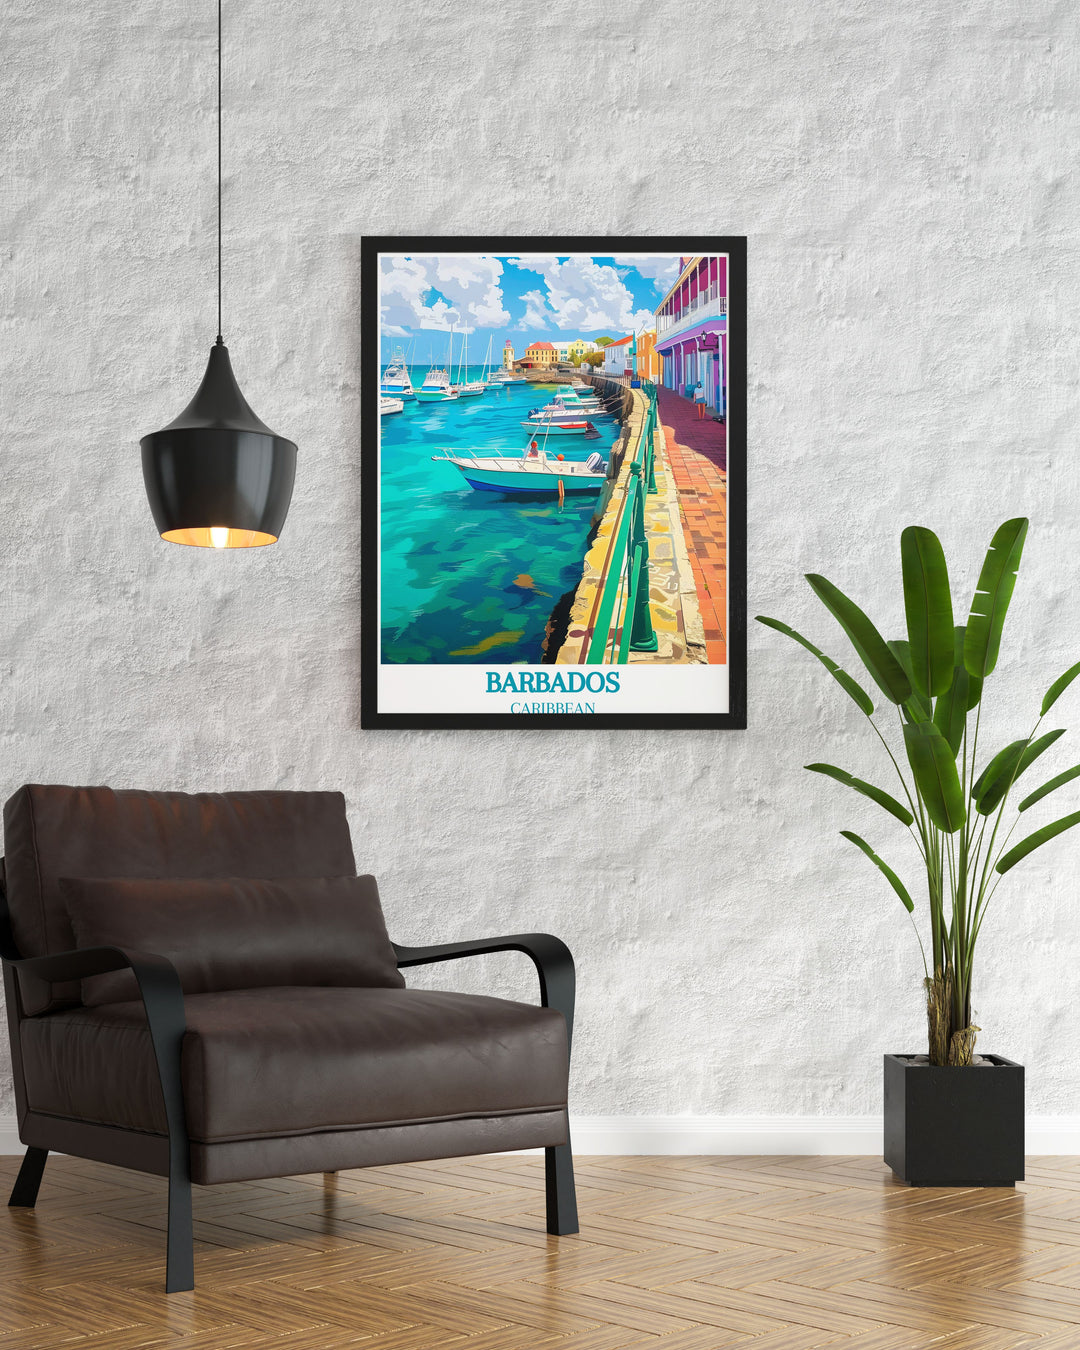 Bridgetown Wall Art highlighting the bustling streets and serene beaches of Barbados, bringing the tropical elegance and lively atmosphere of the Caribbean into your home, perfect for creating a warm and inviting space.